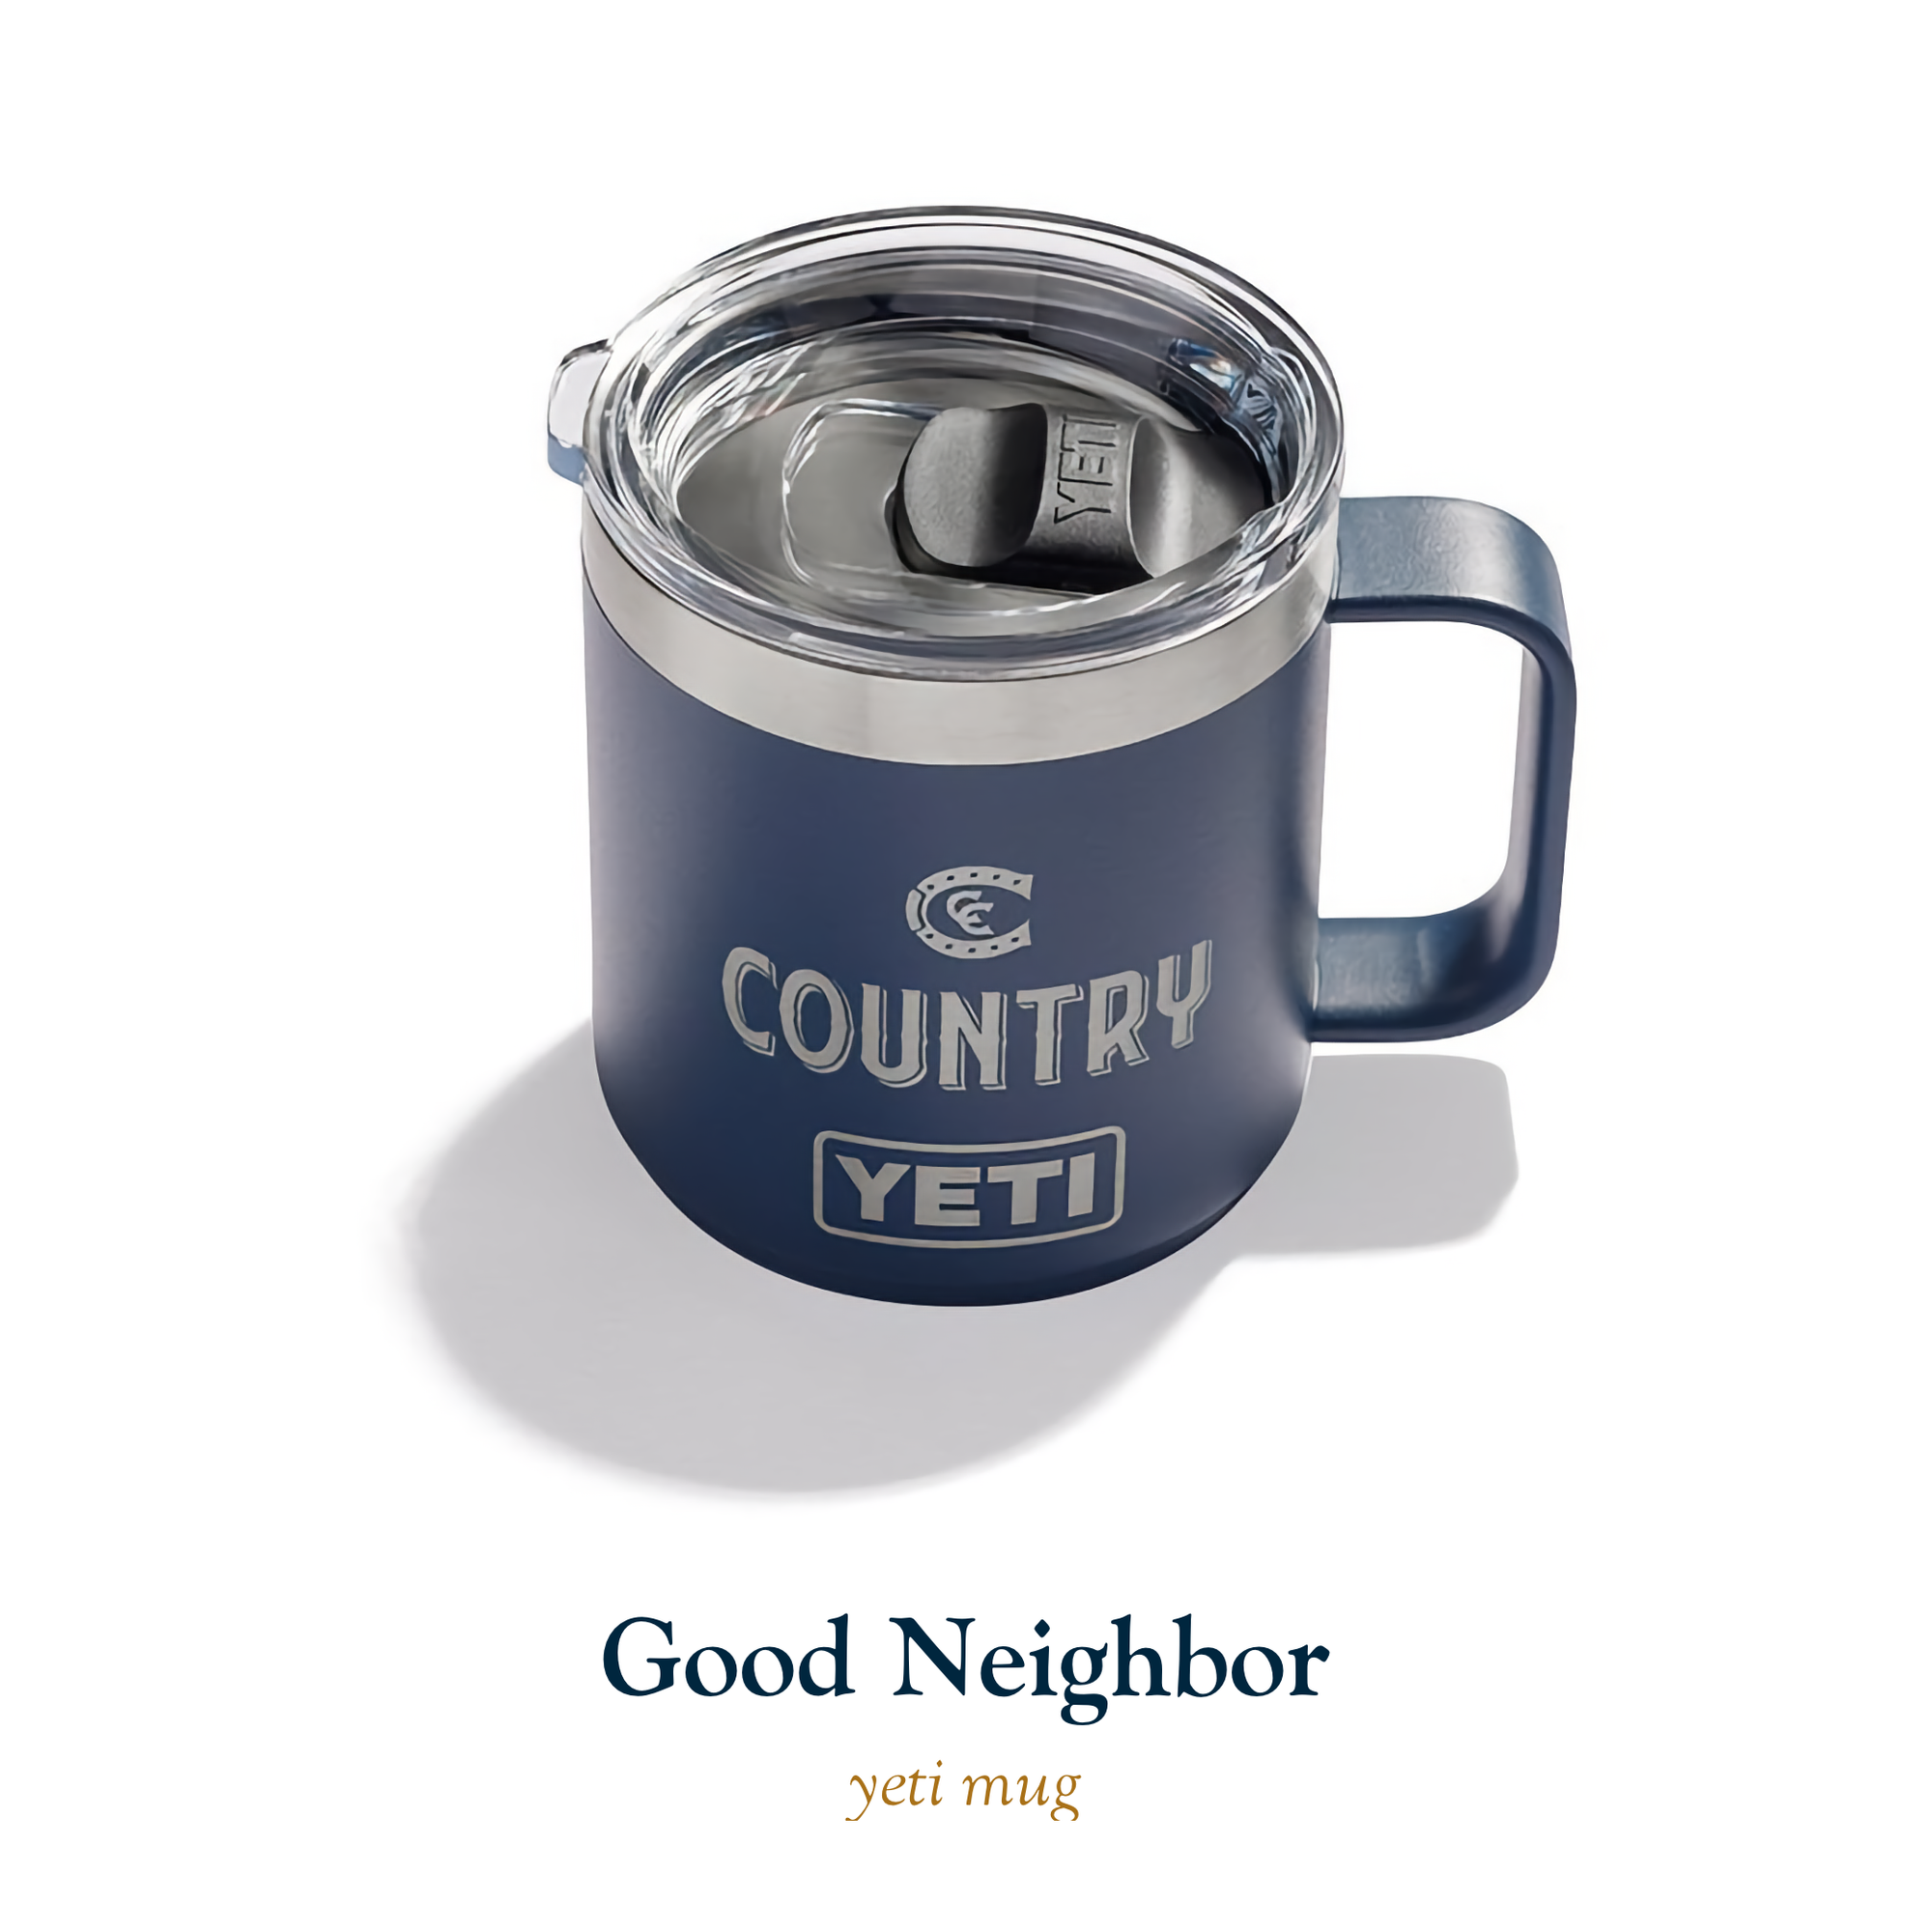 this is a blue metal yeti mug with a country cannabis logo, to have a morning coffee with your light cannabis